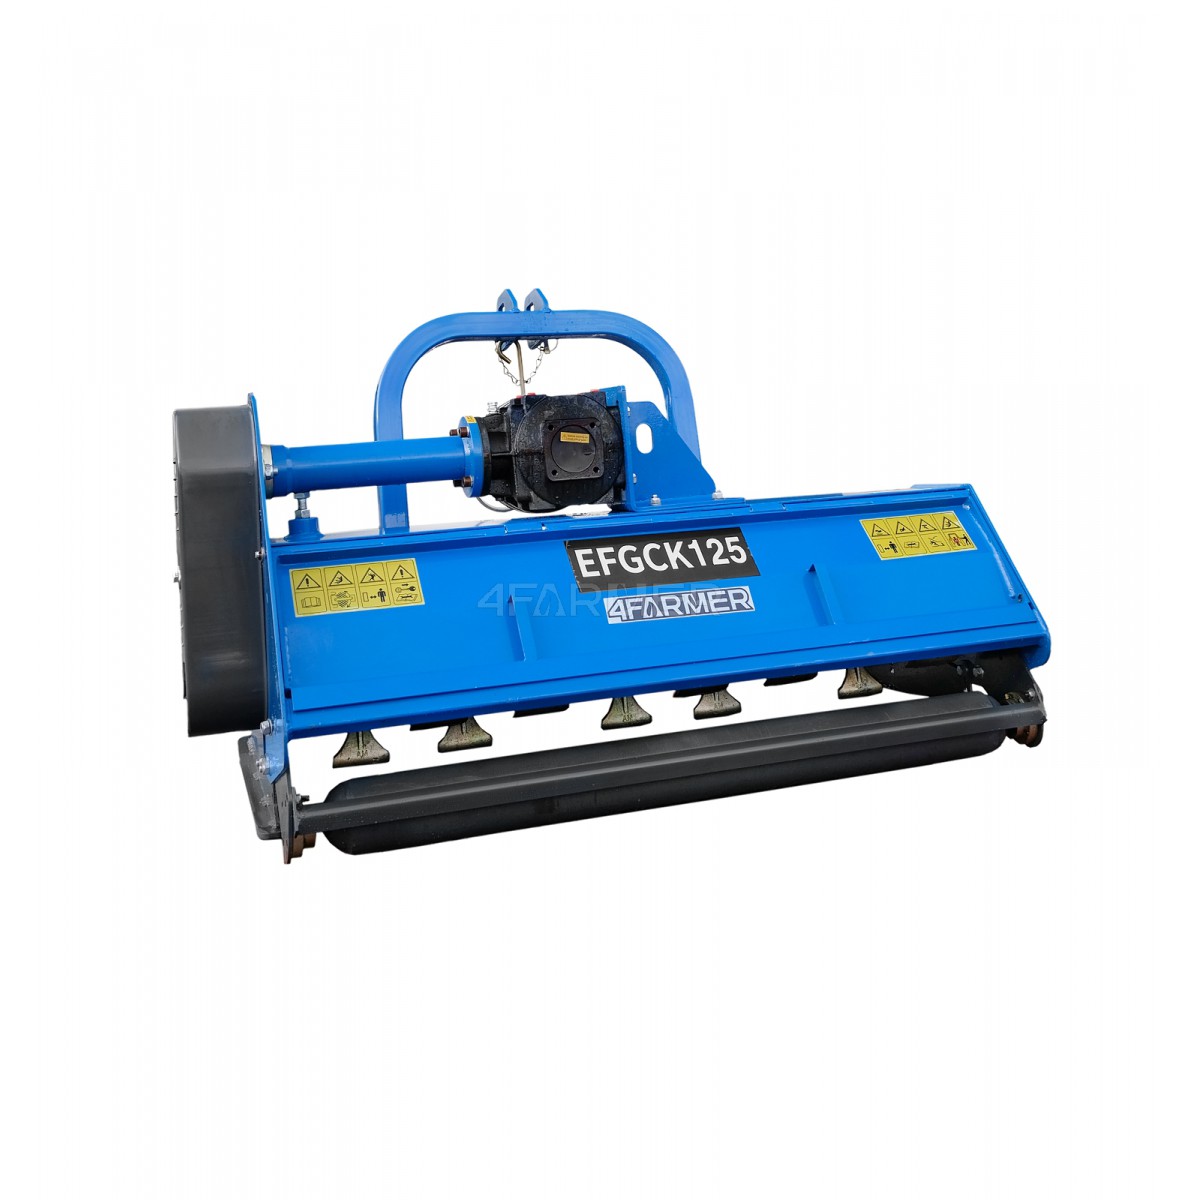 EFGC-K 125 flail mower with opening flap 4FARMER - blue